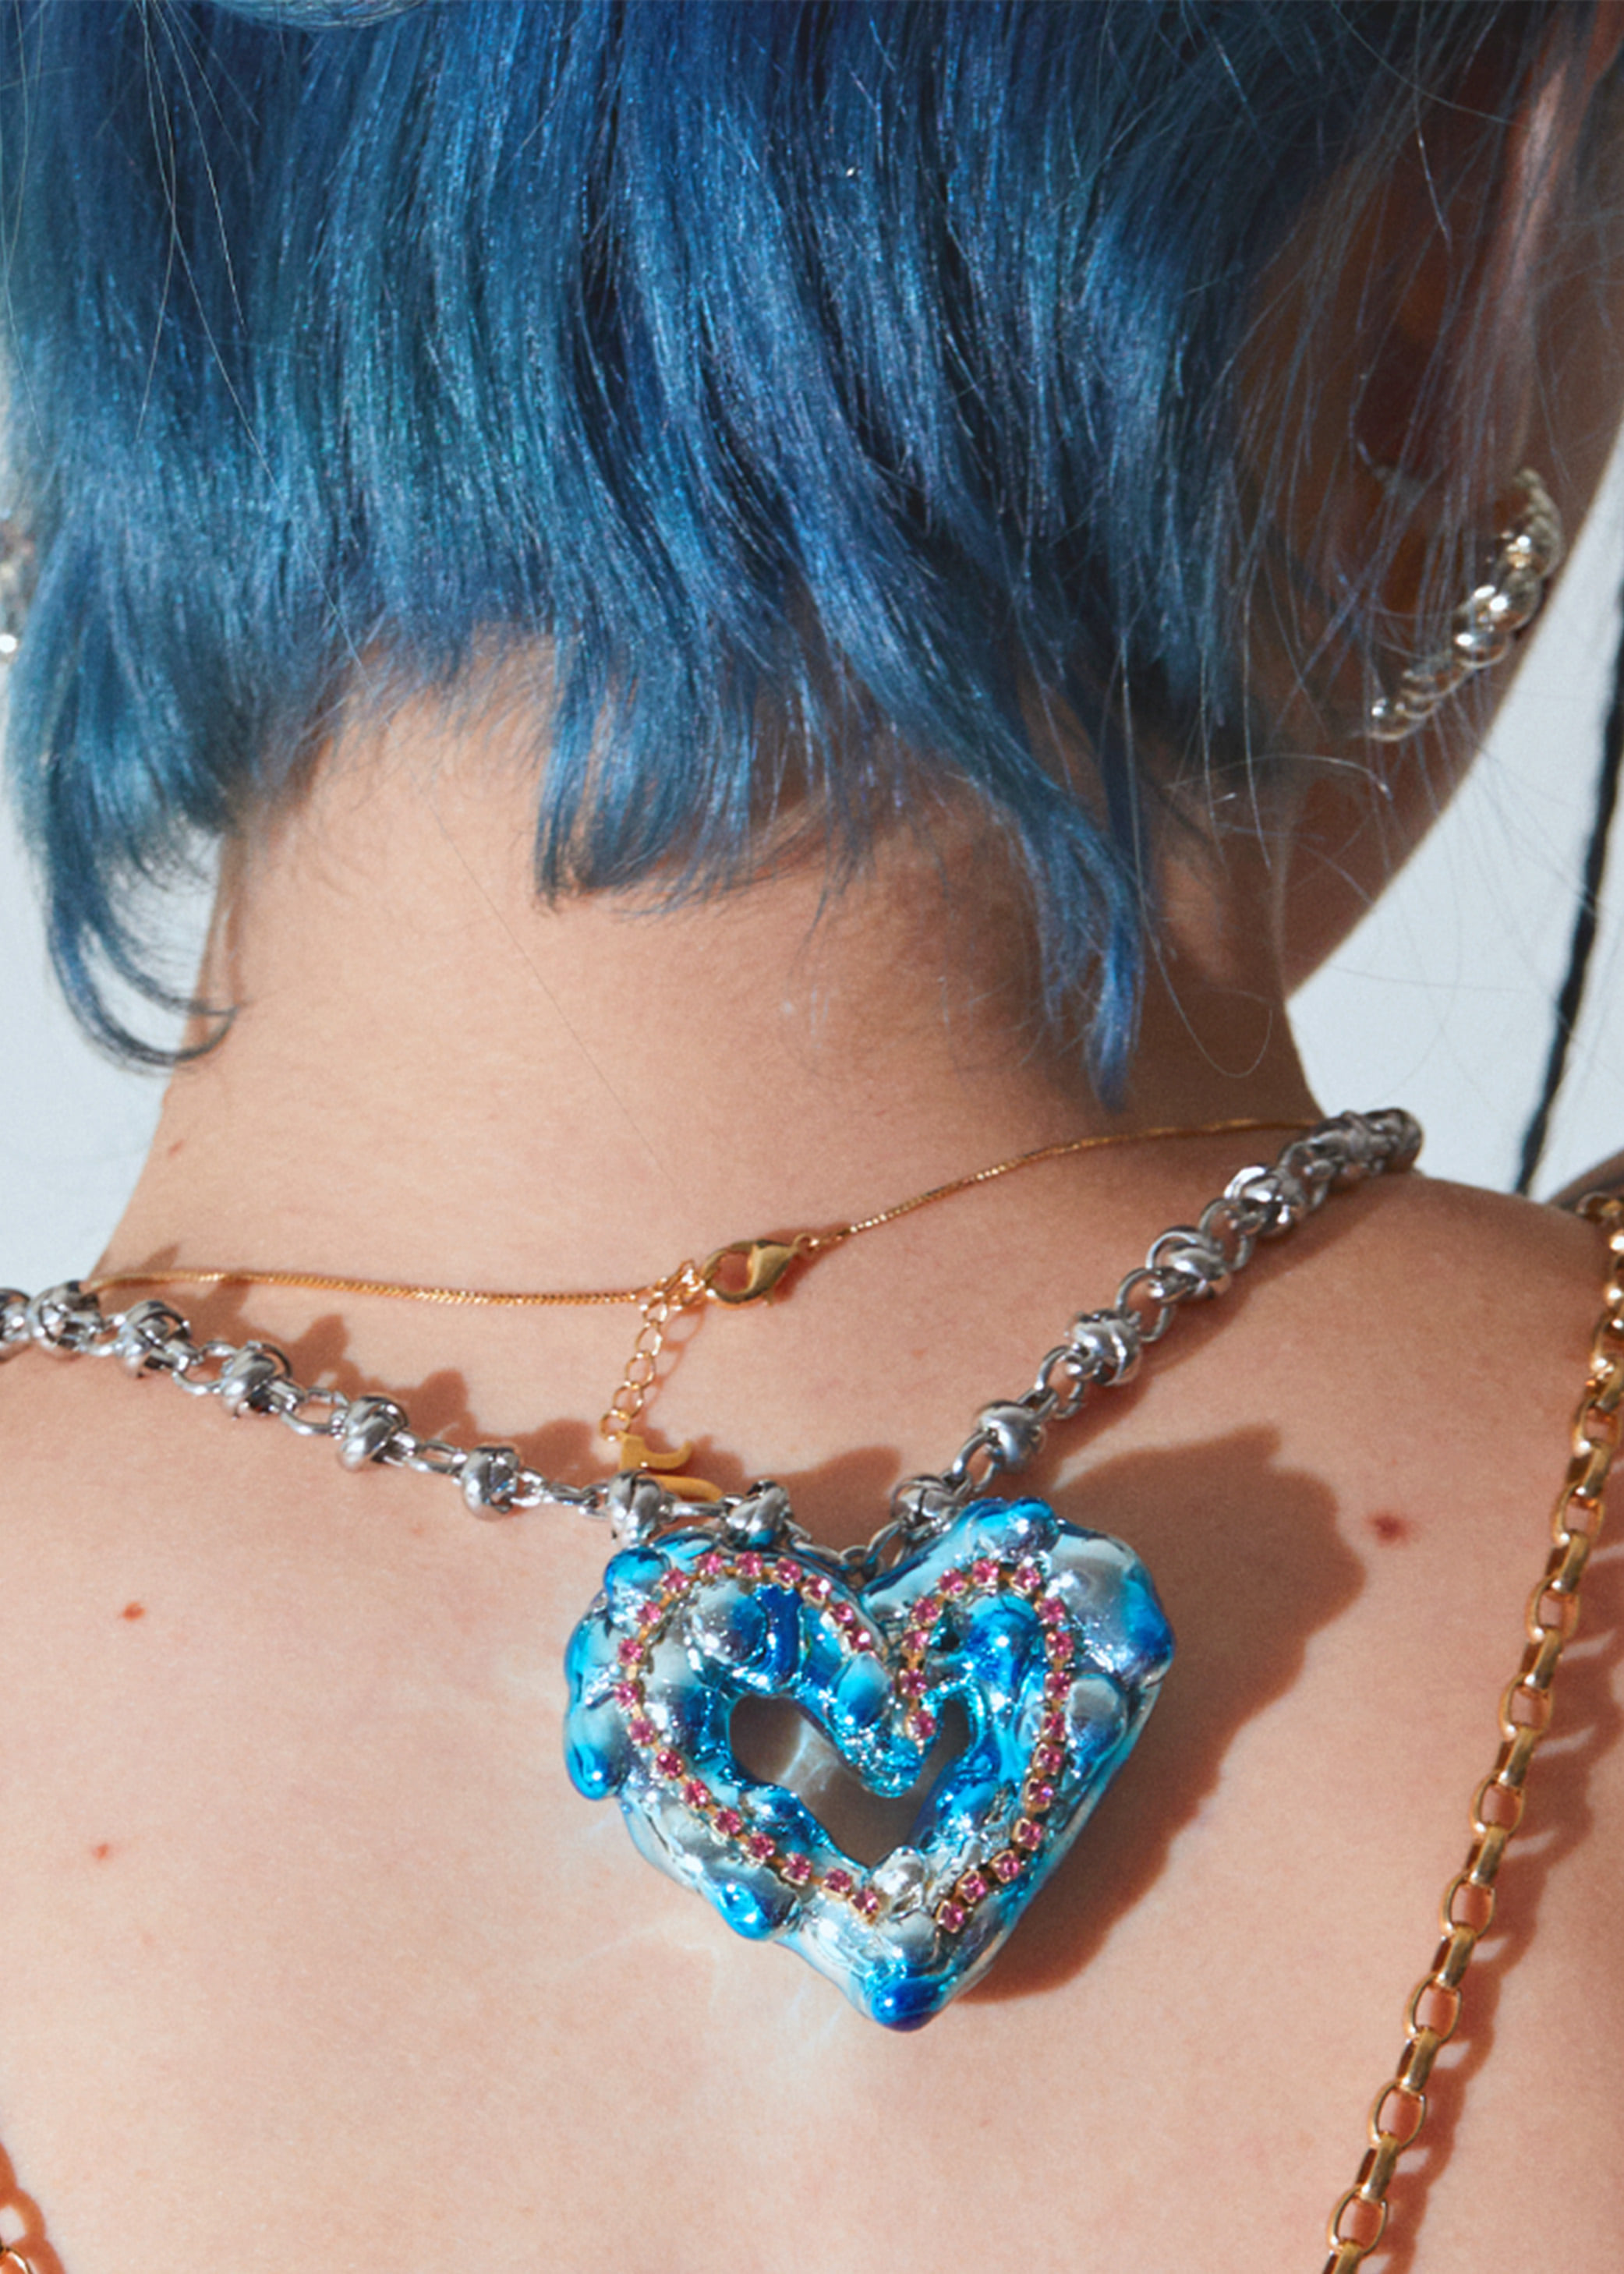 [Melted Potato x YIEYIE] Dasher Heart Chain Necklace